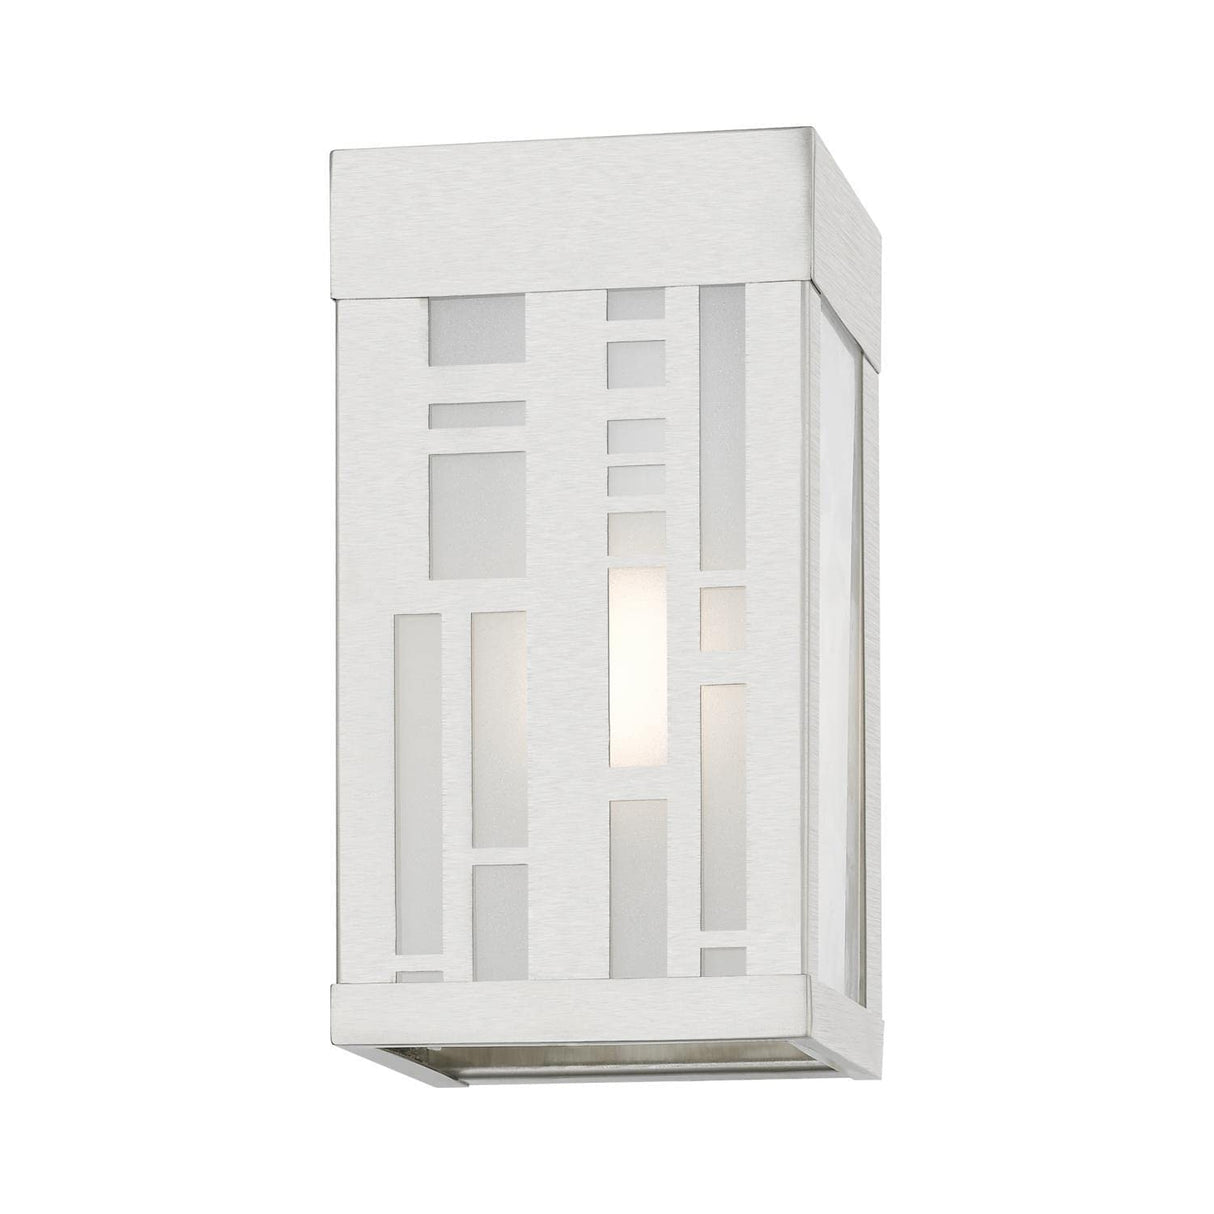 Livex Lighting 22971-91 Malmo - 1 Light Small Outdoor ADA Wall Sconce in Modern Style-8.5 Inches Tall and 4.5 Inches Wide, Finish Color: Brushed Nickel